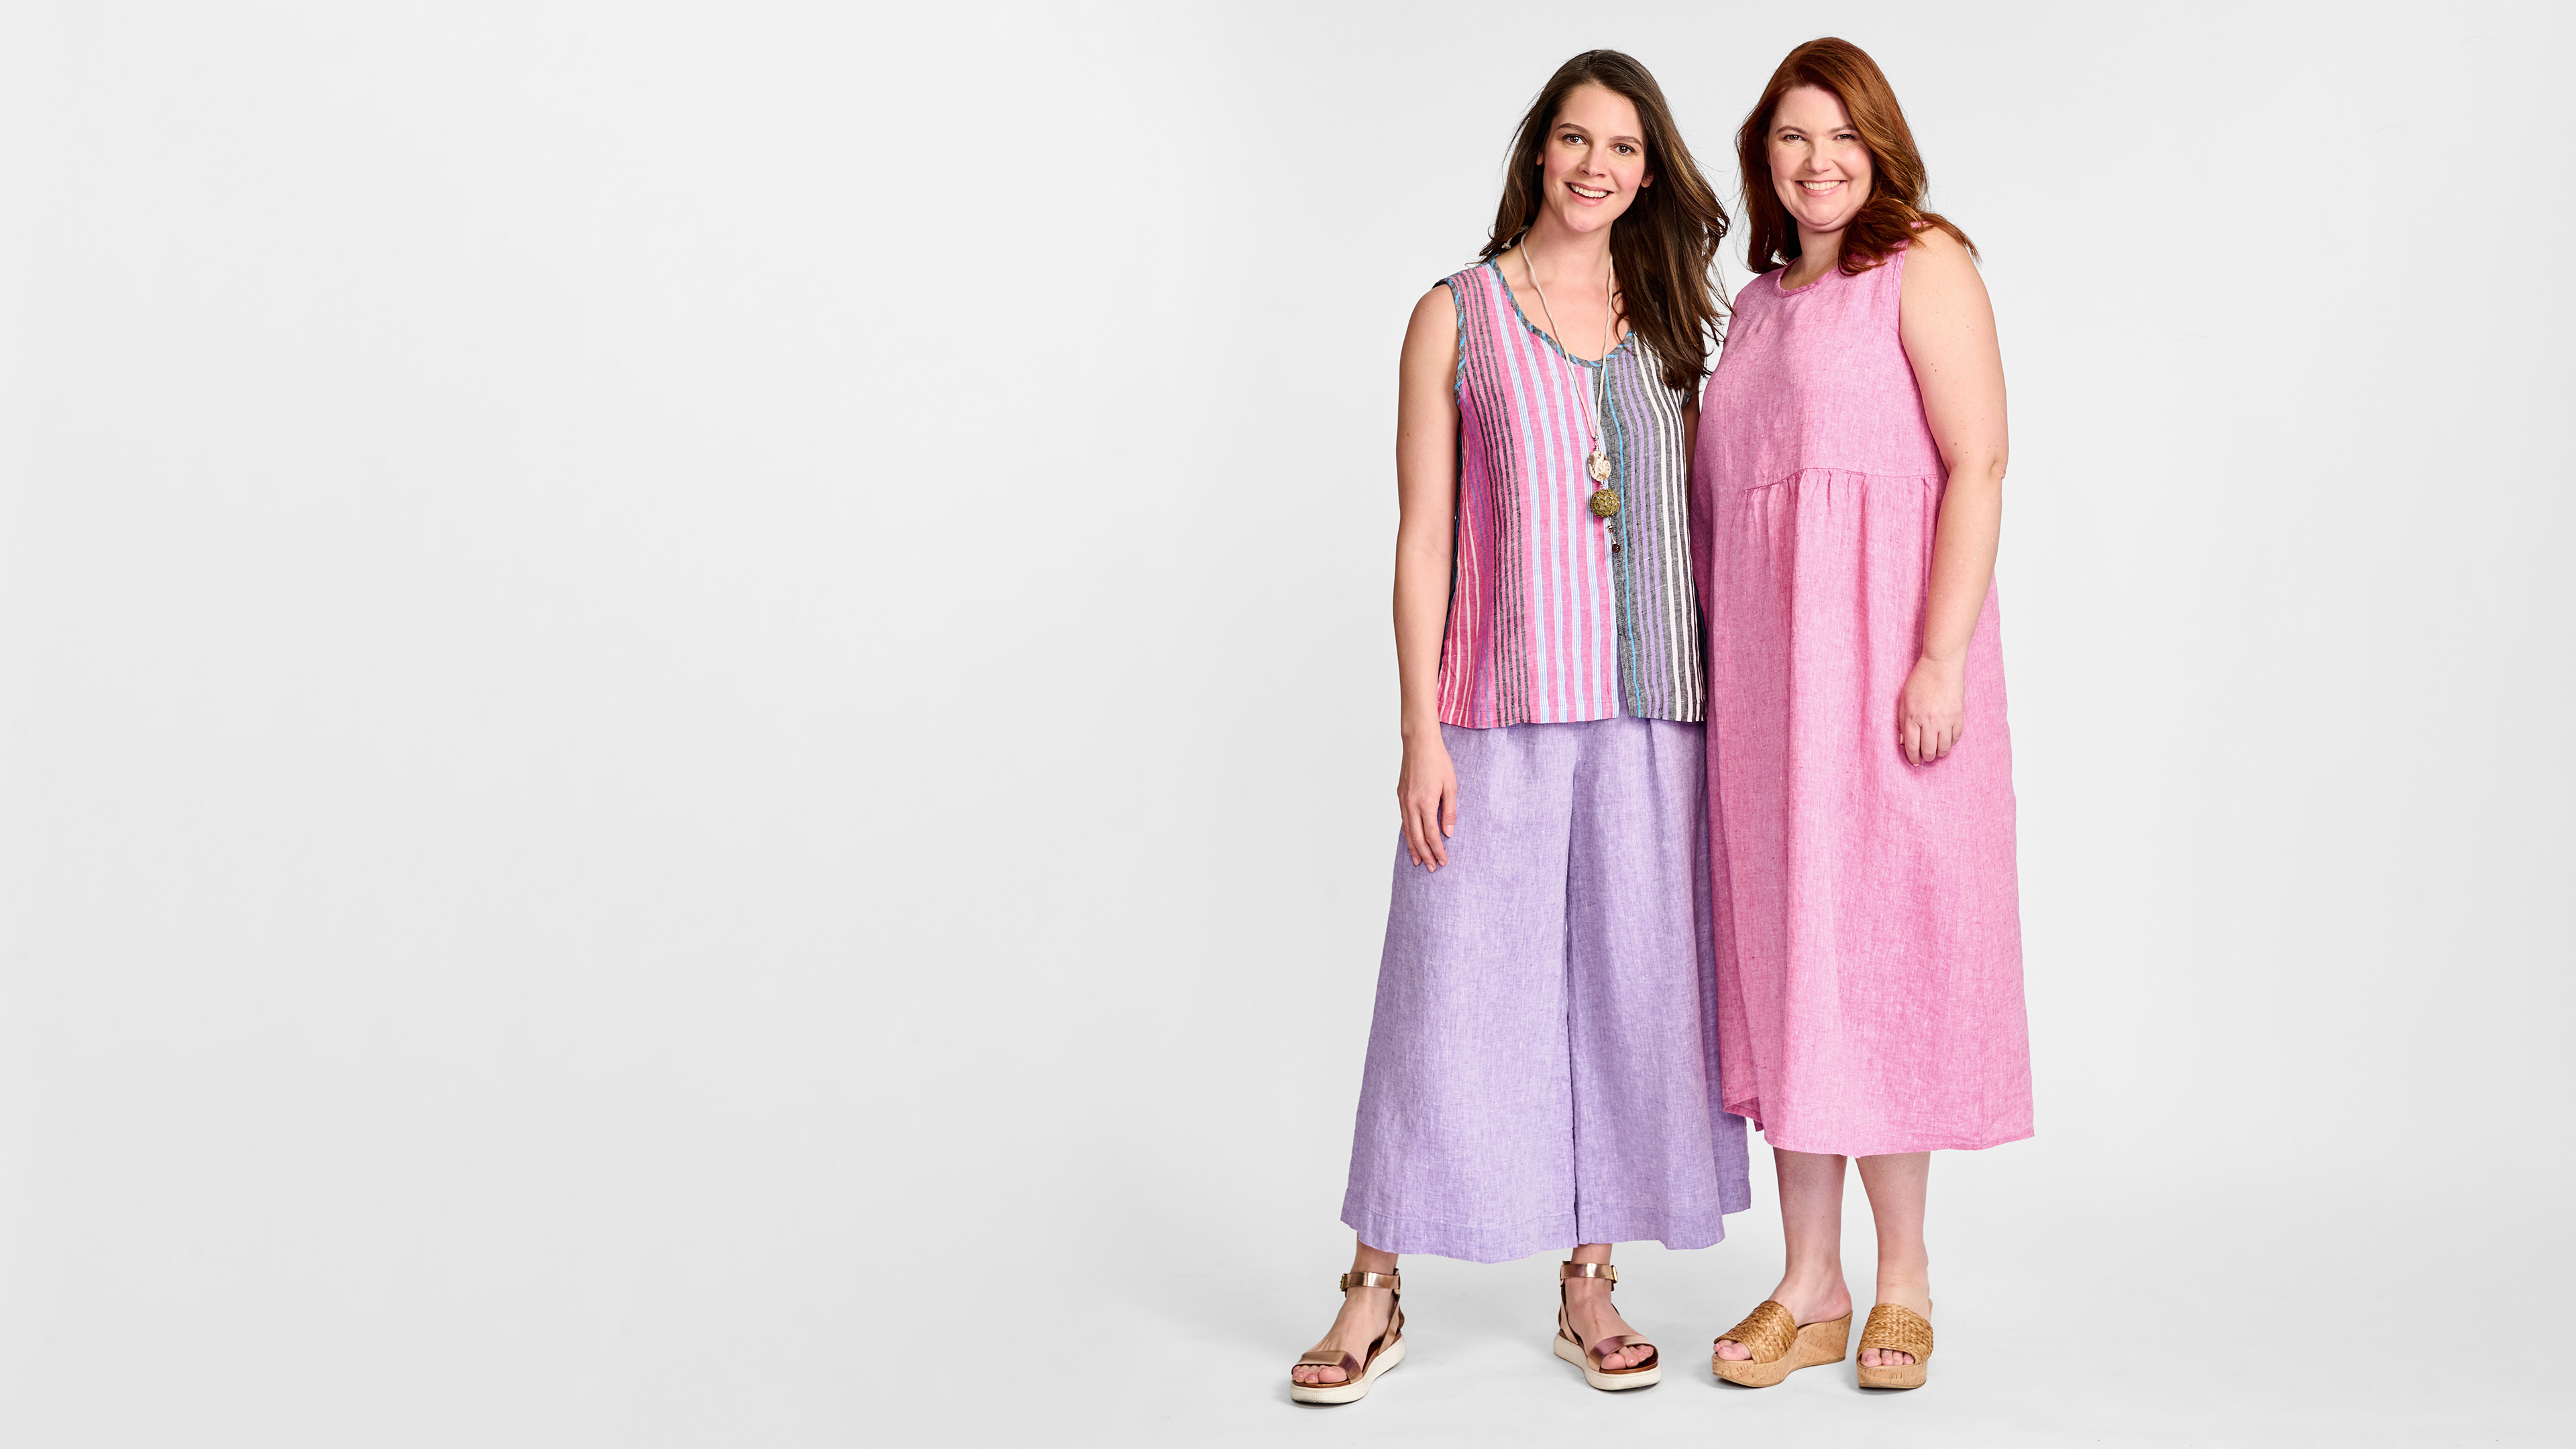 Sunshine 2023 FLAX women's linen clothing collection.